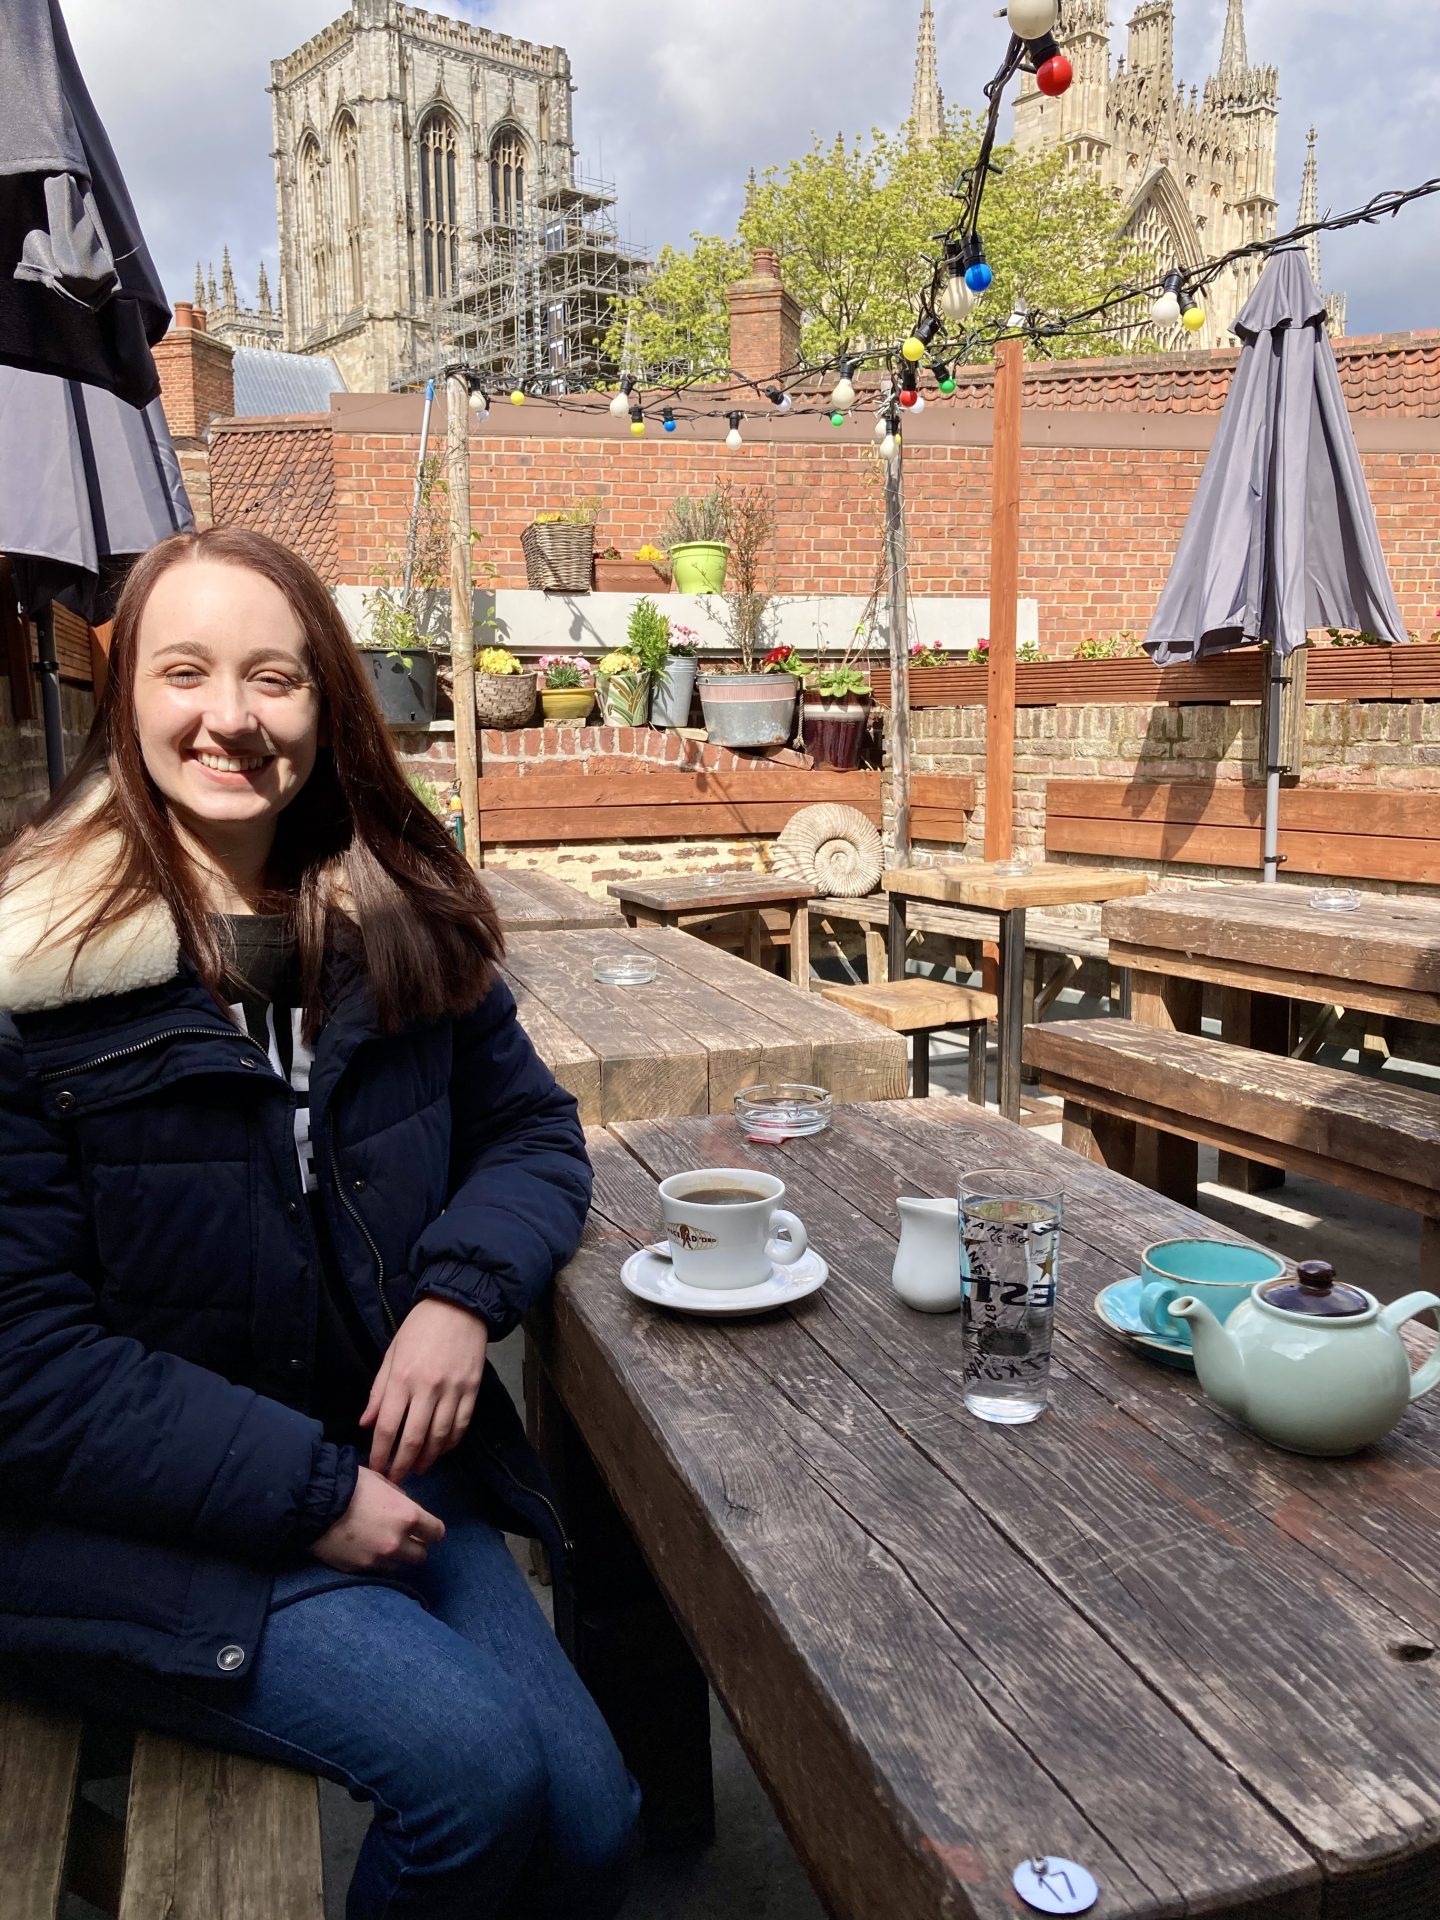 pippa sat on roof terrace at The Habit, with a cup of tea and blue teapot on the bench table in front of her and beautiful views of york minster in the background